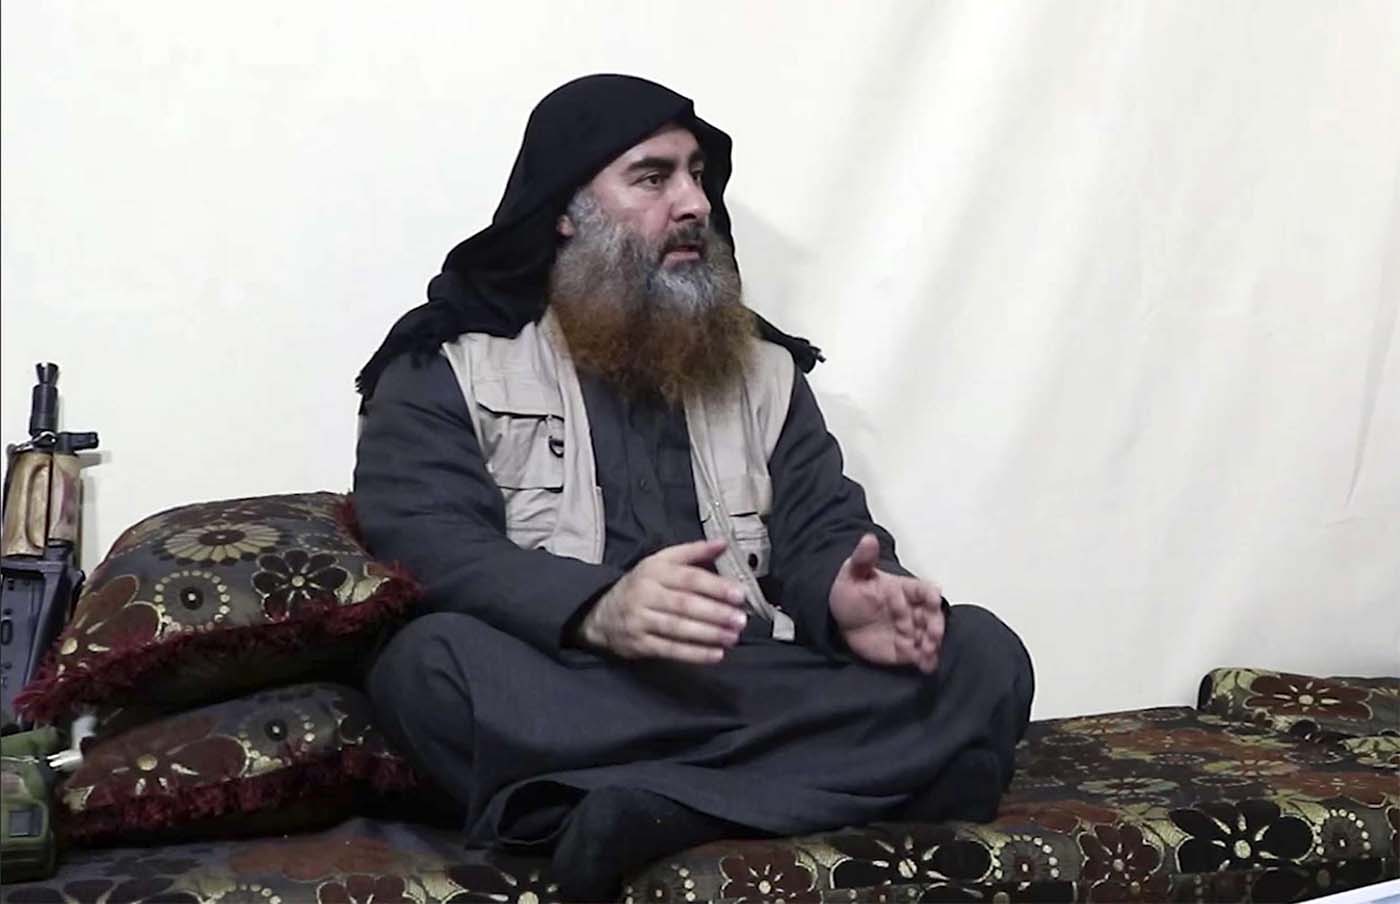 Baghdadi was reported killed or injured multiple times since then